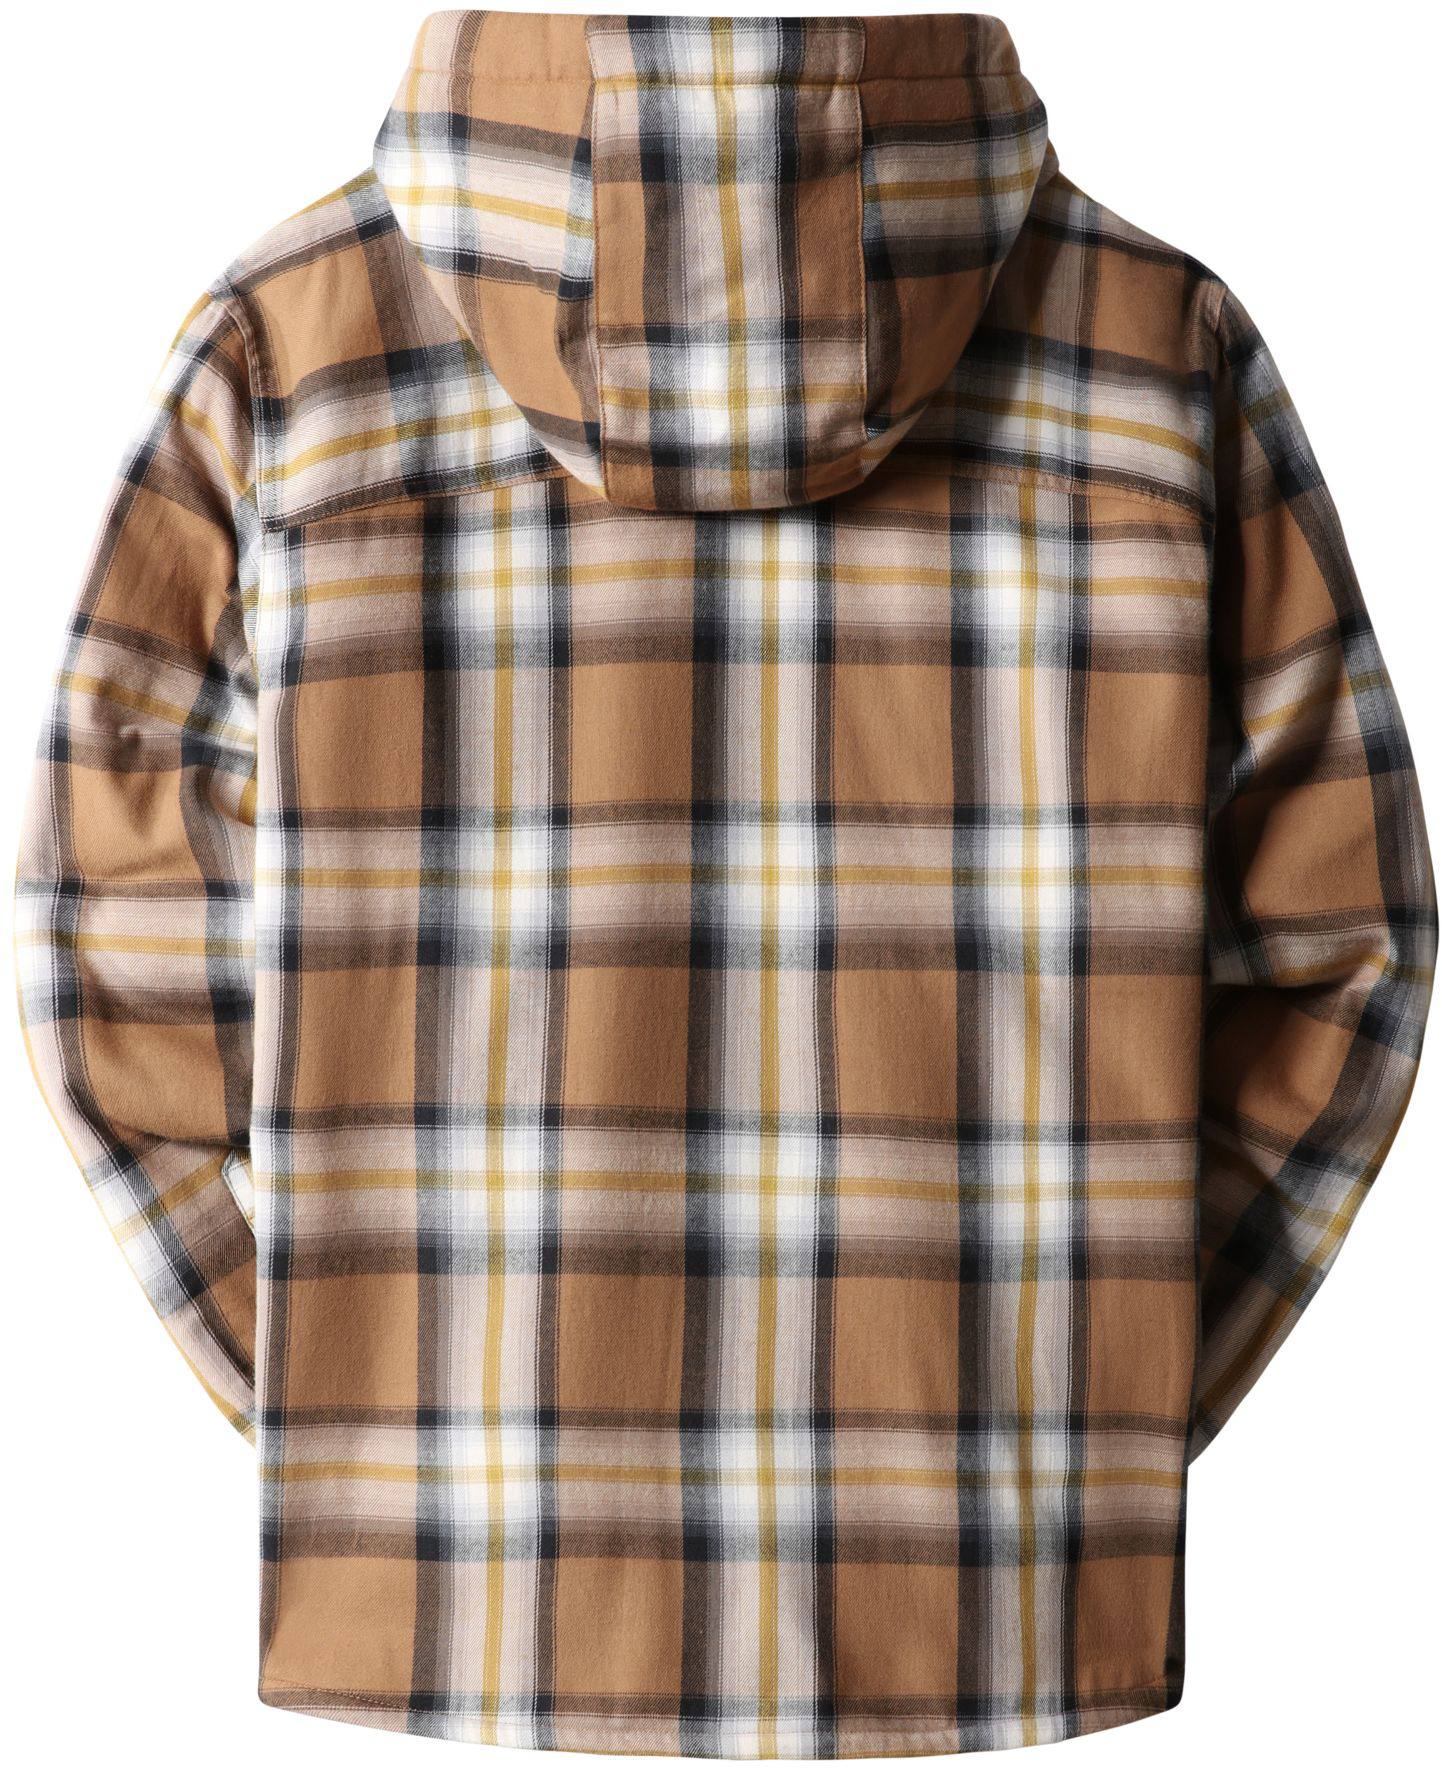 The North Face Men’s Hooded Campshire Shirt